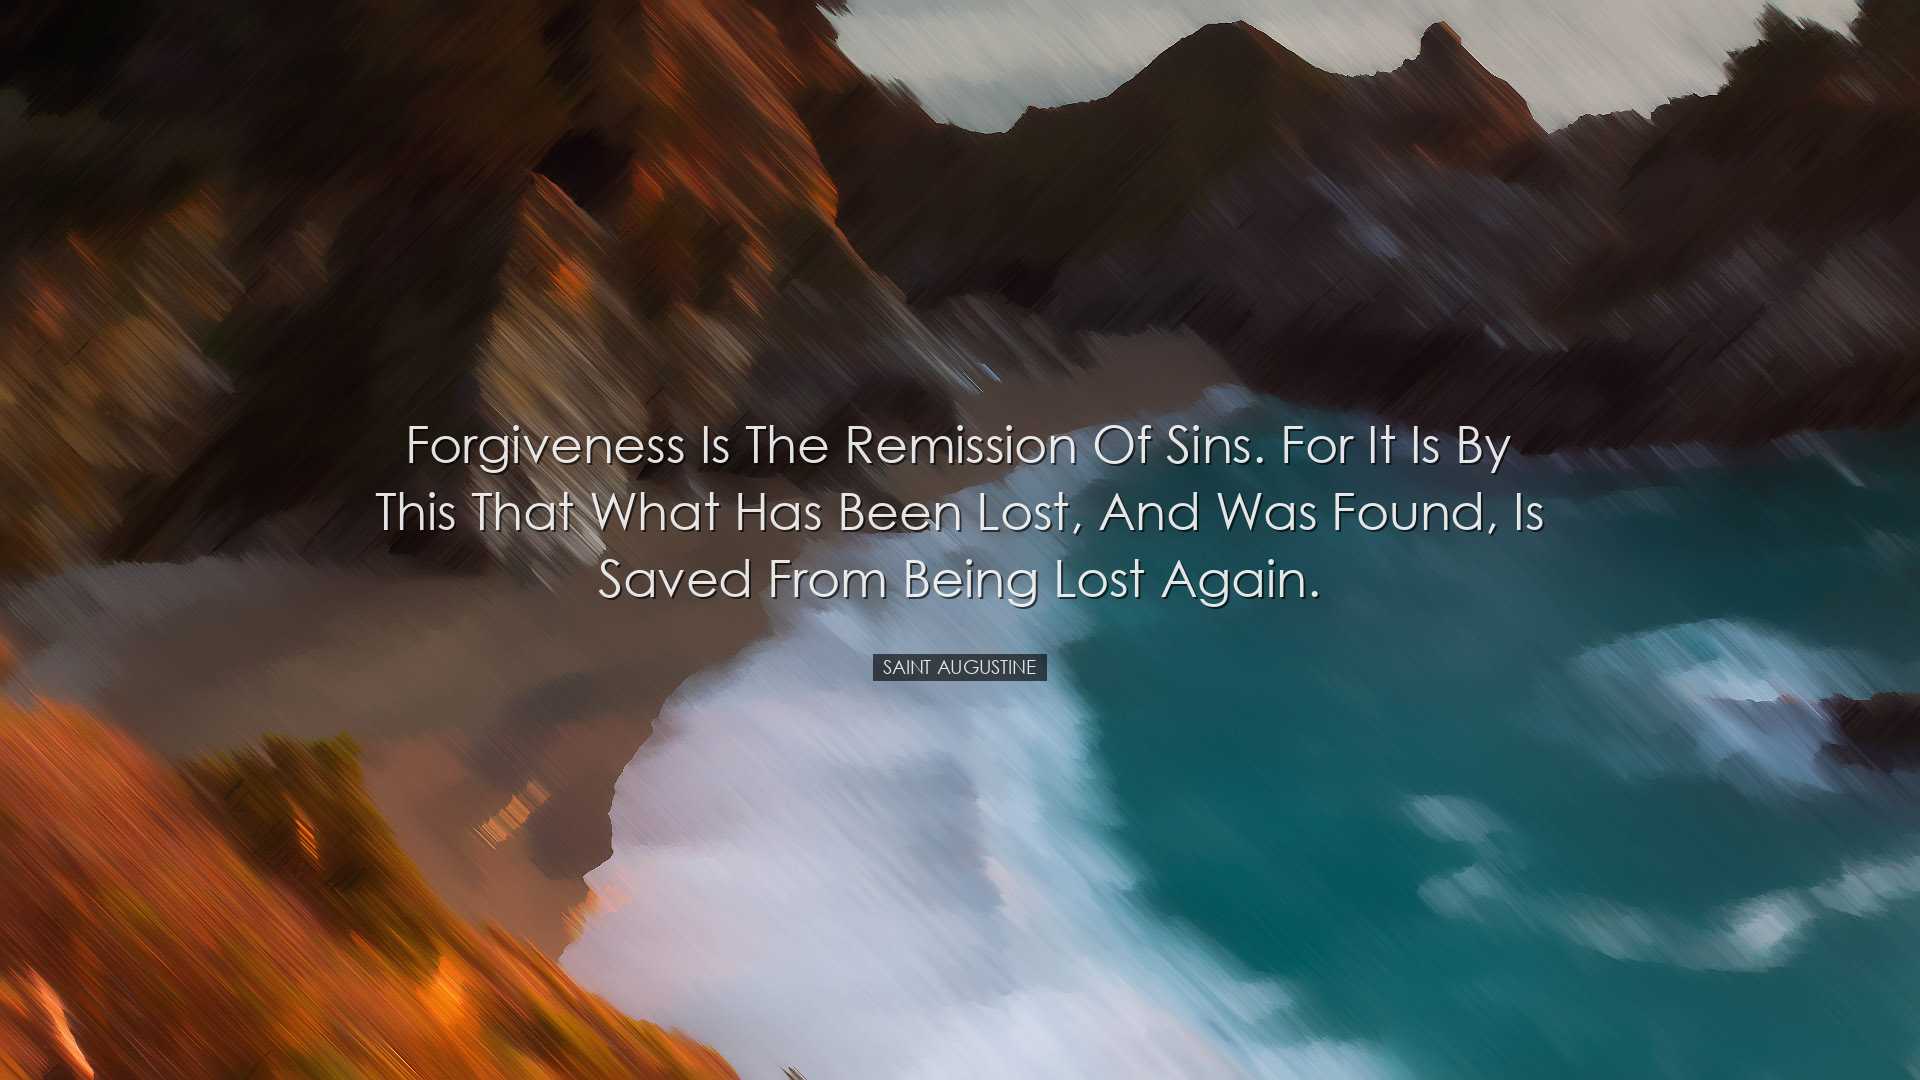 Forgiveness is the remission of sins. For it is by this that what